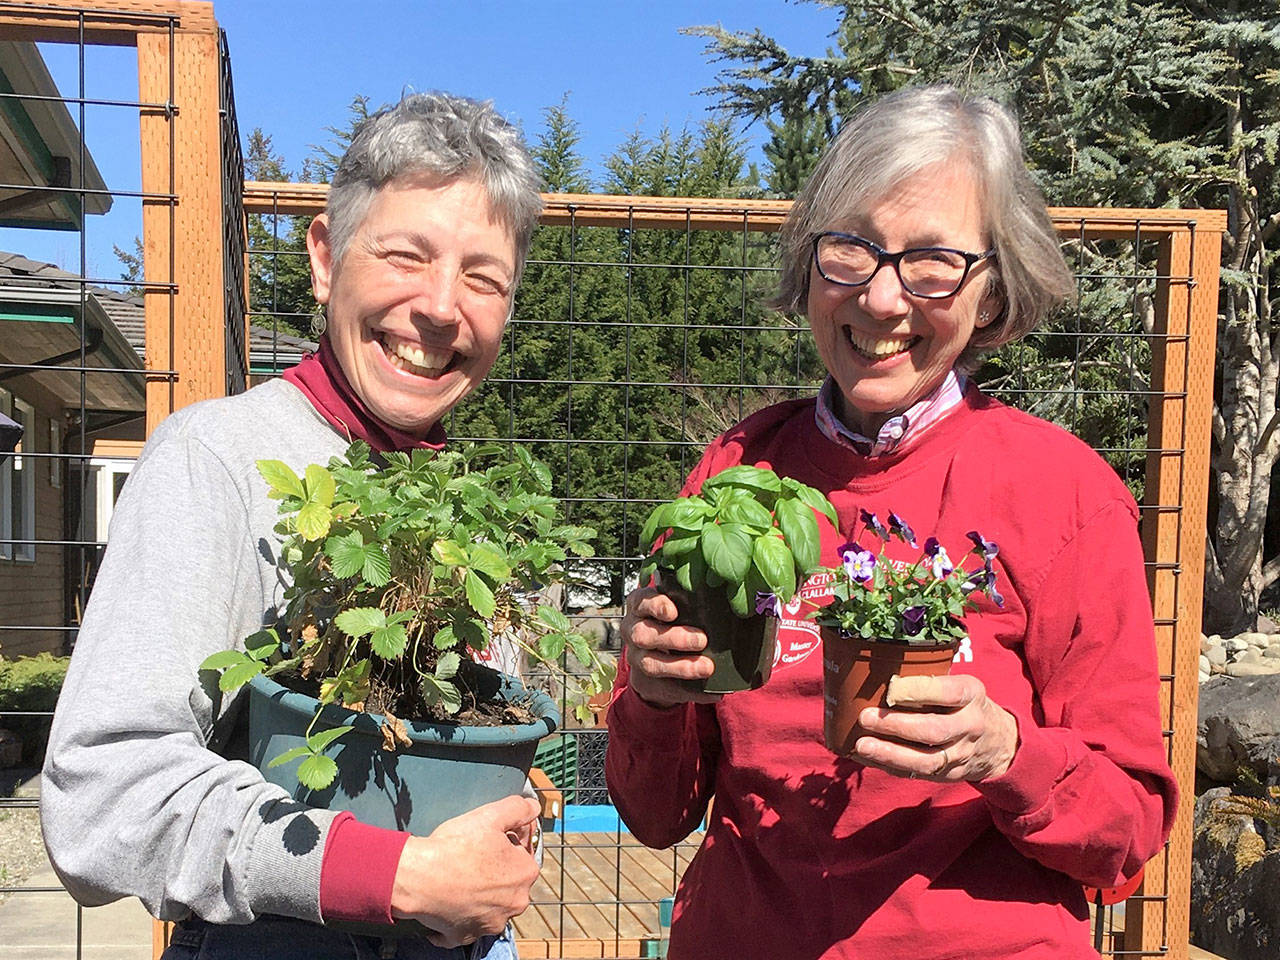 Jeanette Stehr-Green, left, and Judy English will present “Growing Vegetables and Fruits in Containers” at noon Thursday.